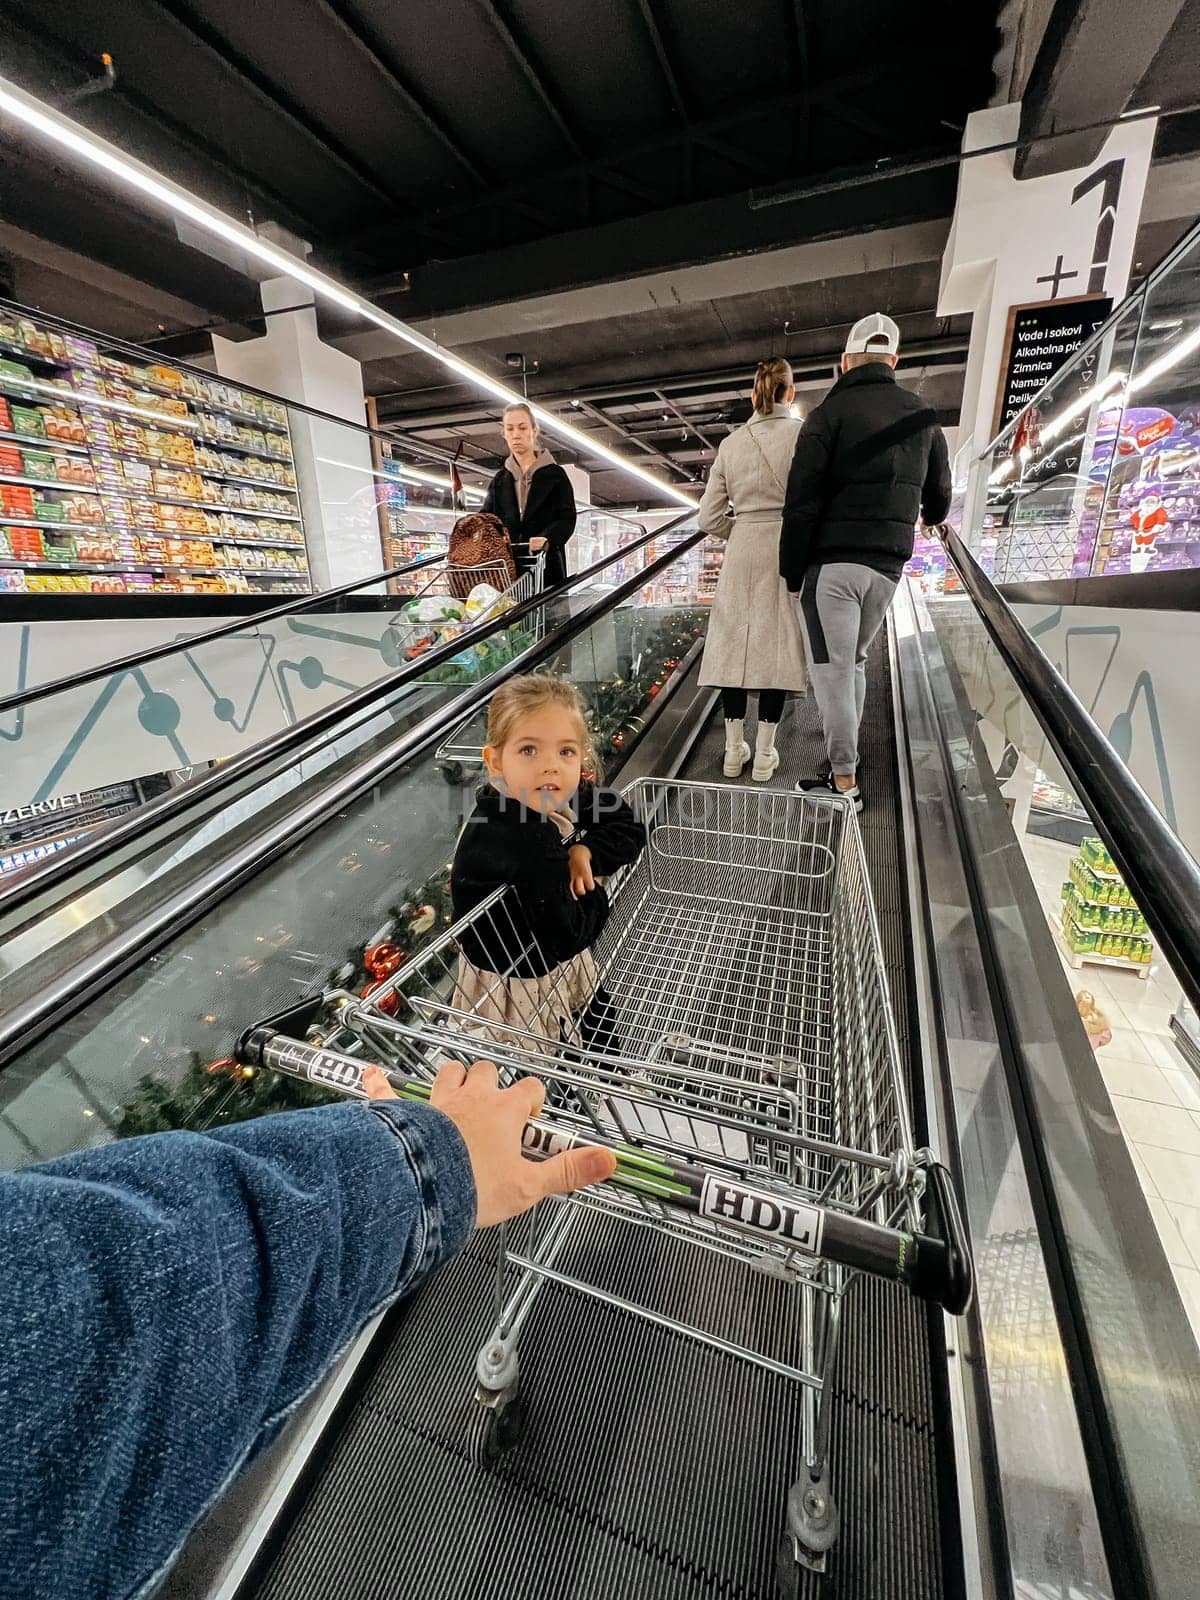 Dad with a little girl ride an escalator in a shopping mall with a shopping cart. High quality photo